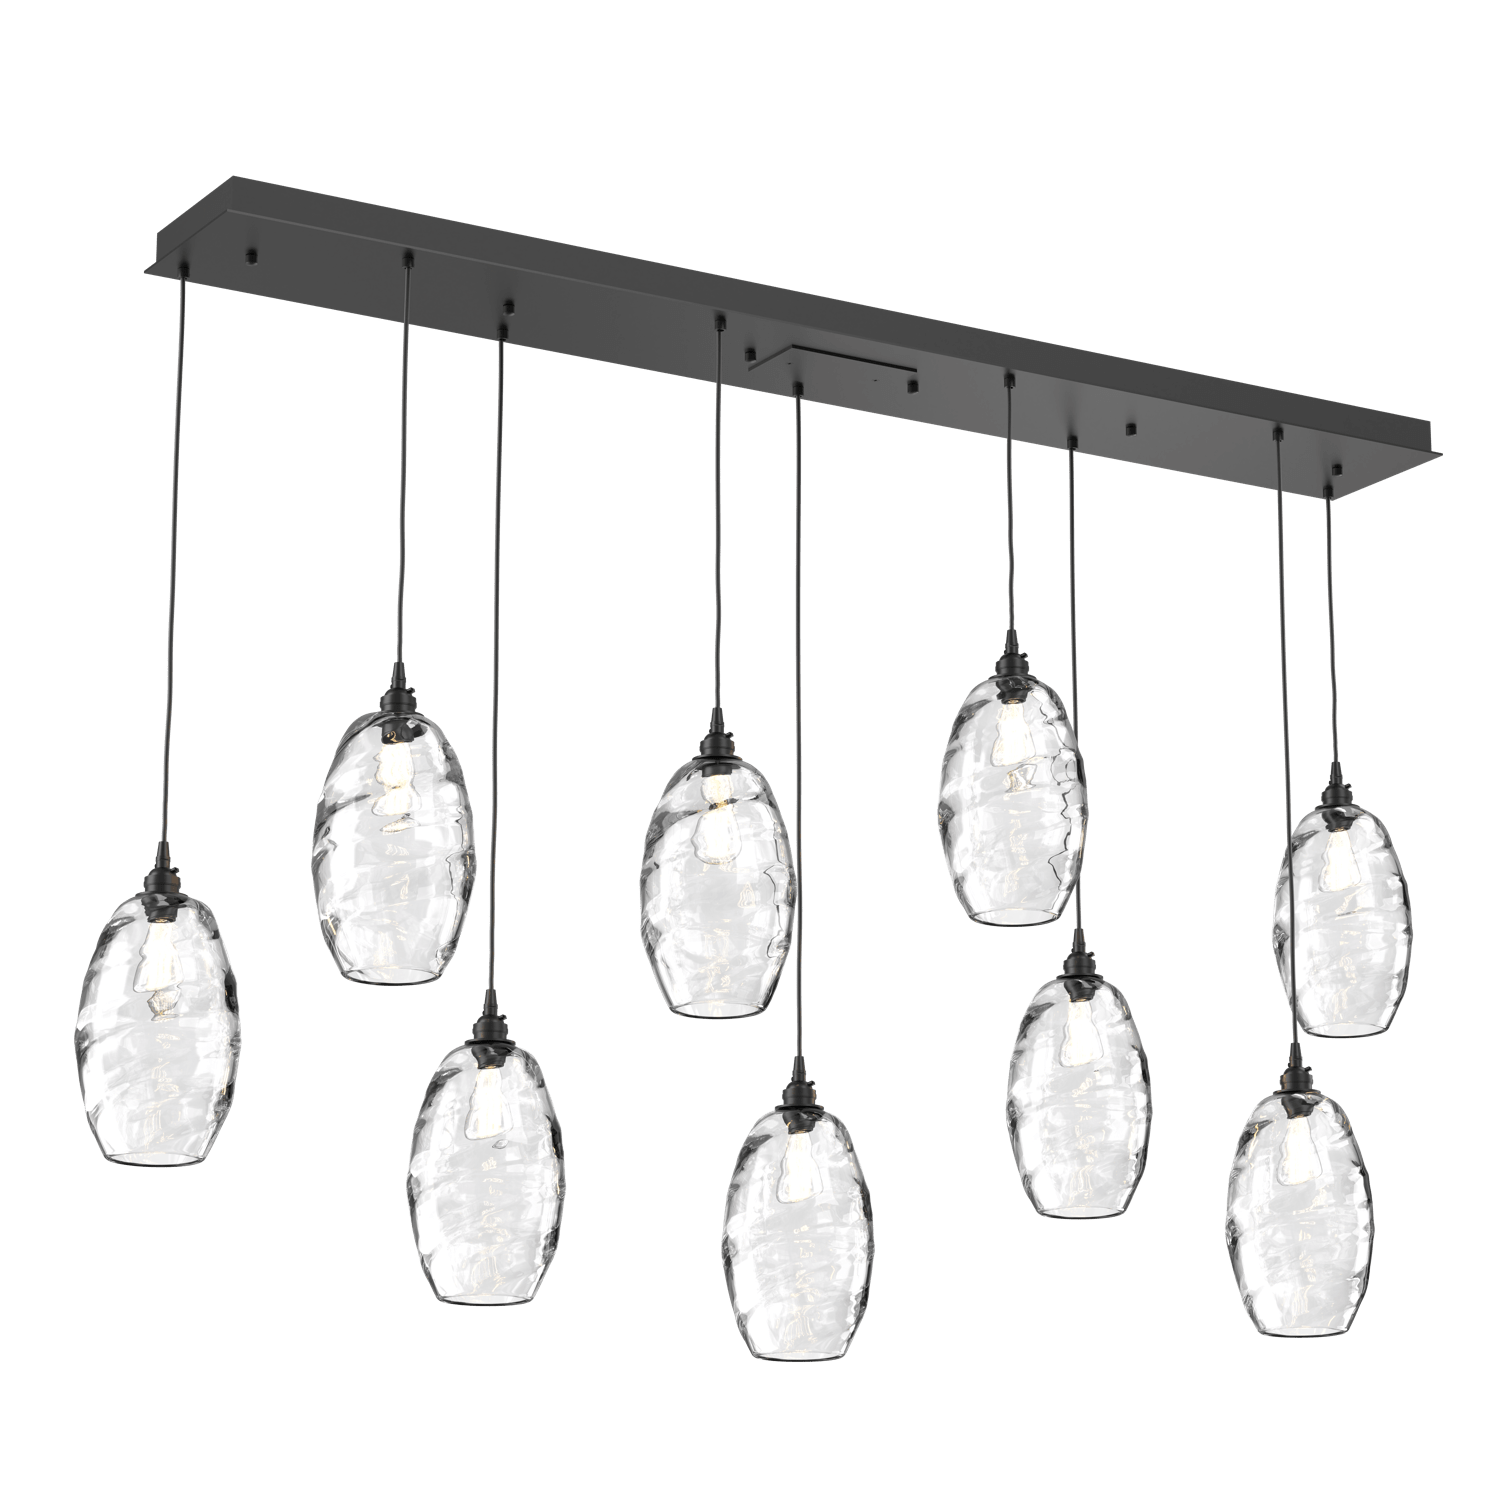 PLB0035-09-MB-OC-Hammerton-Studio-Optic-Blown-Glass-Elisse-9-light-linear-pendant-chandelier-with-matte-black-finish-and-optic-clear-blown-glass-shades-and-incandescent-lamping